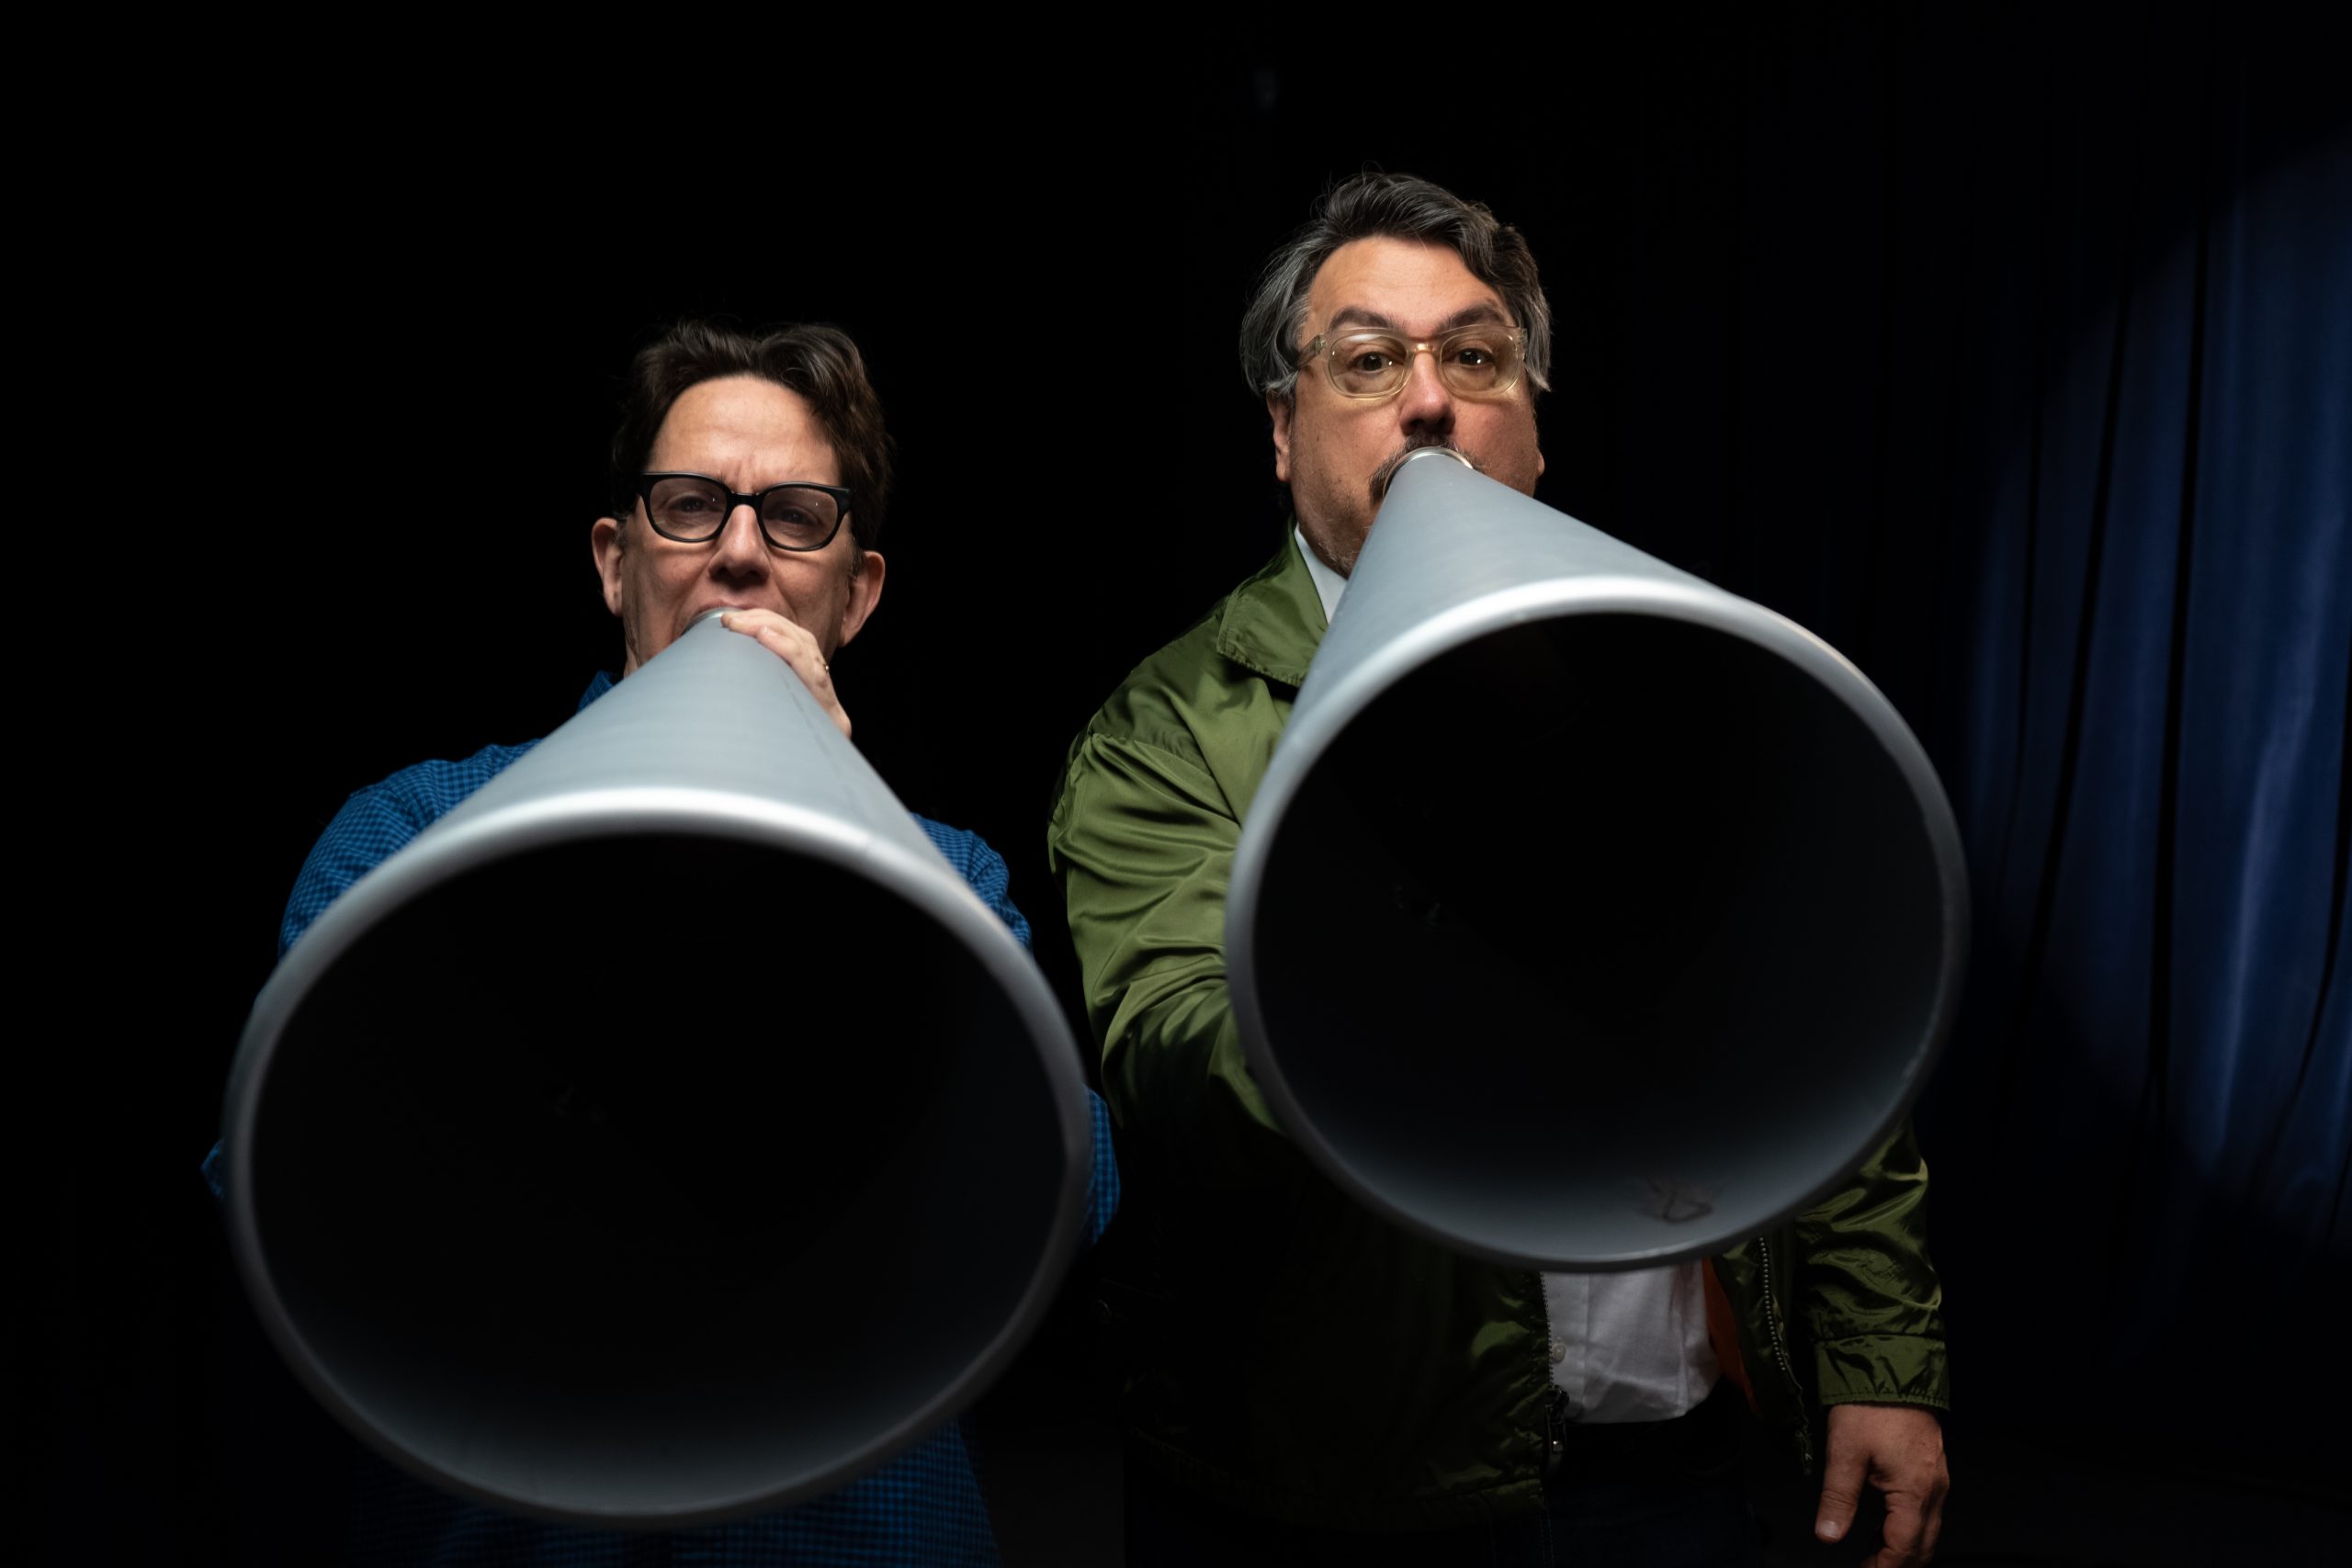 They Might Be Giants / photo by Sam Graff / courtesy of Girlie Action Media